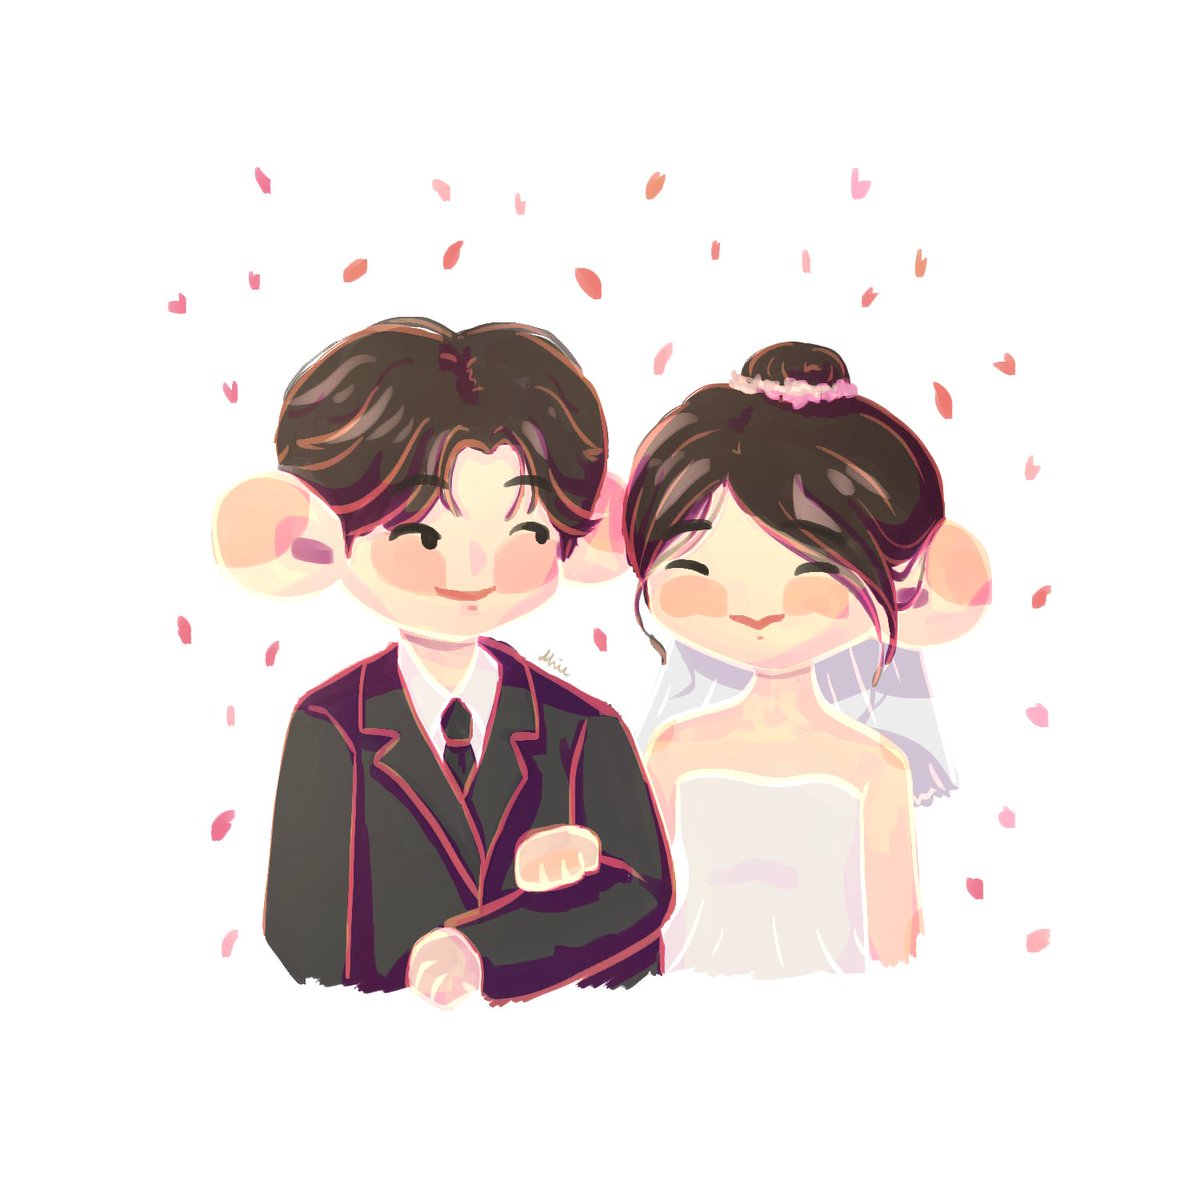 congratulations on your wedding son dongwoon and wife💜🤍
결혼 진심으로 축하해요 🥺

@beastdw #손동운 #SONDONGWOON